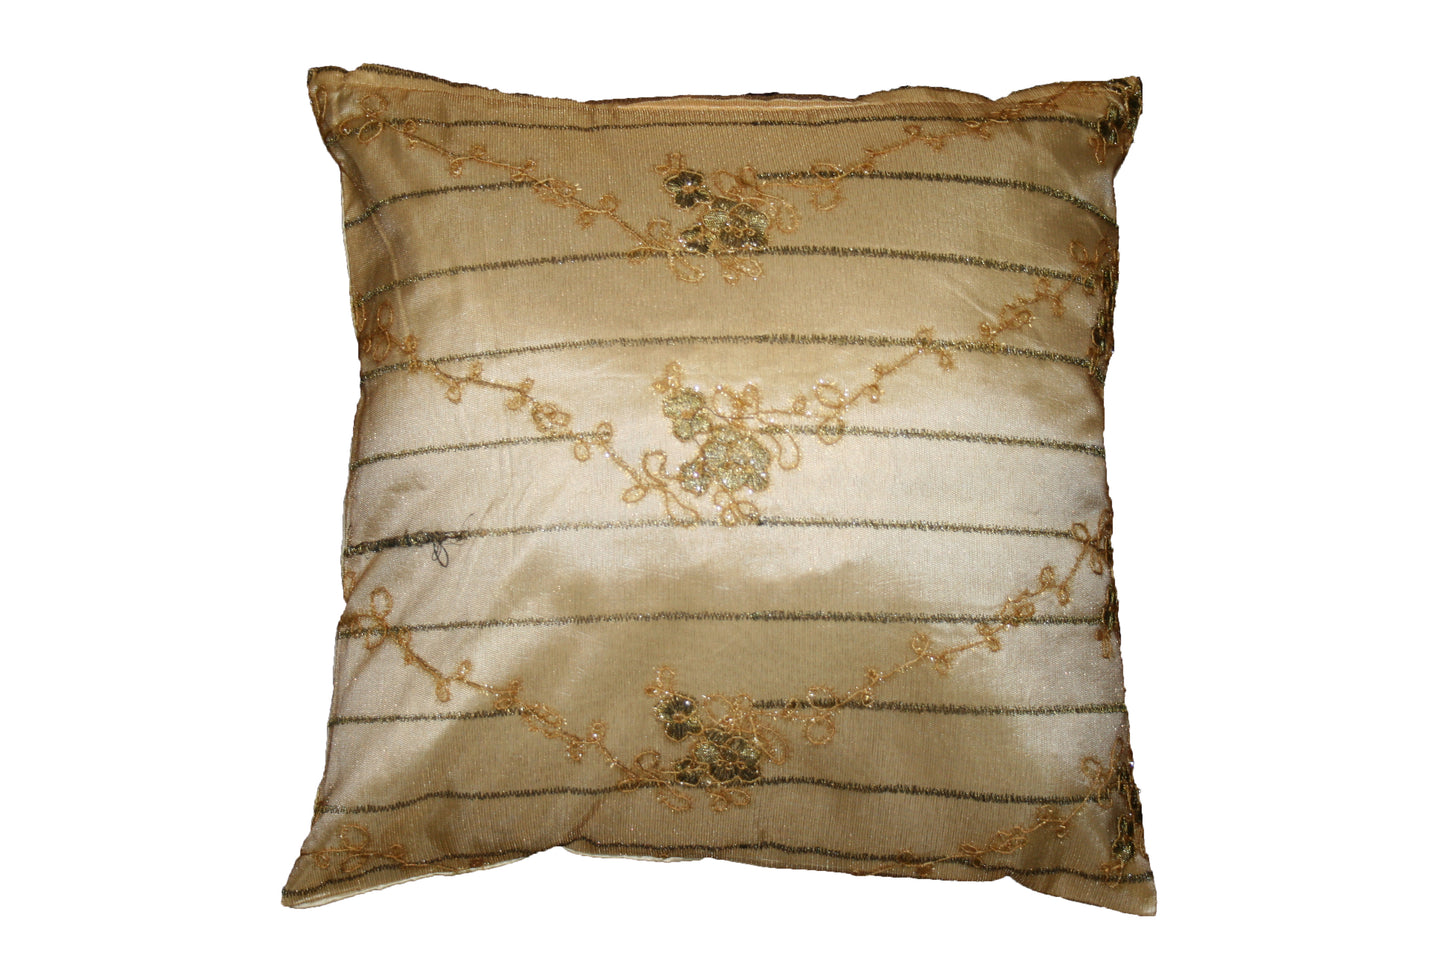 Swiss Embroidered Lace Decorative Decorative Accent Throw Pillow